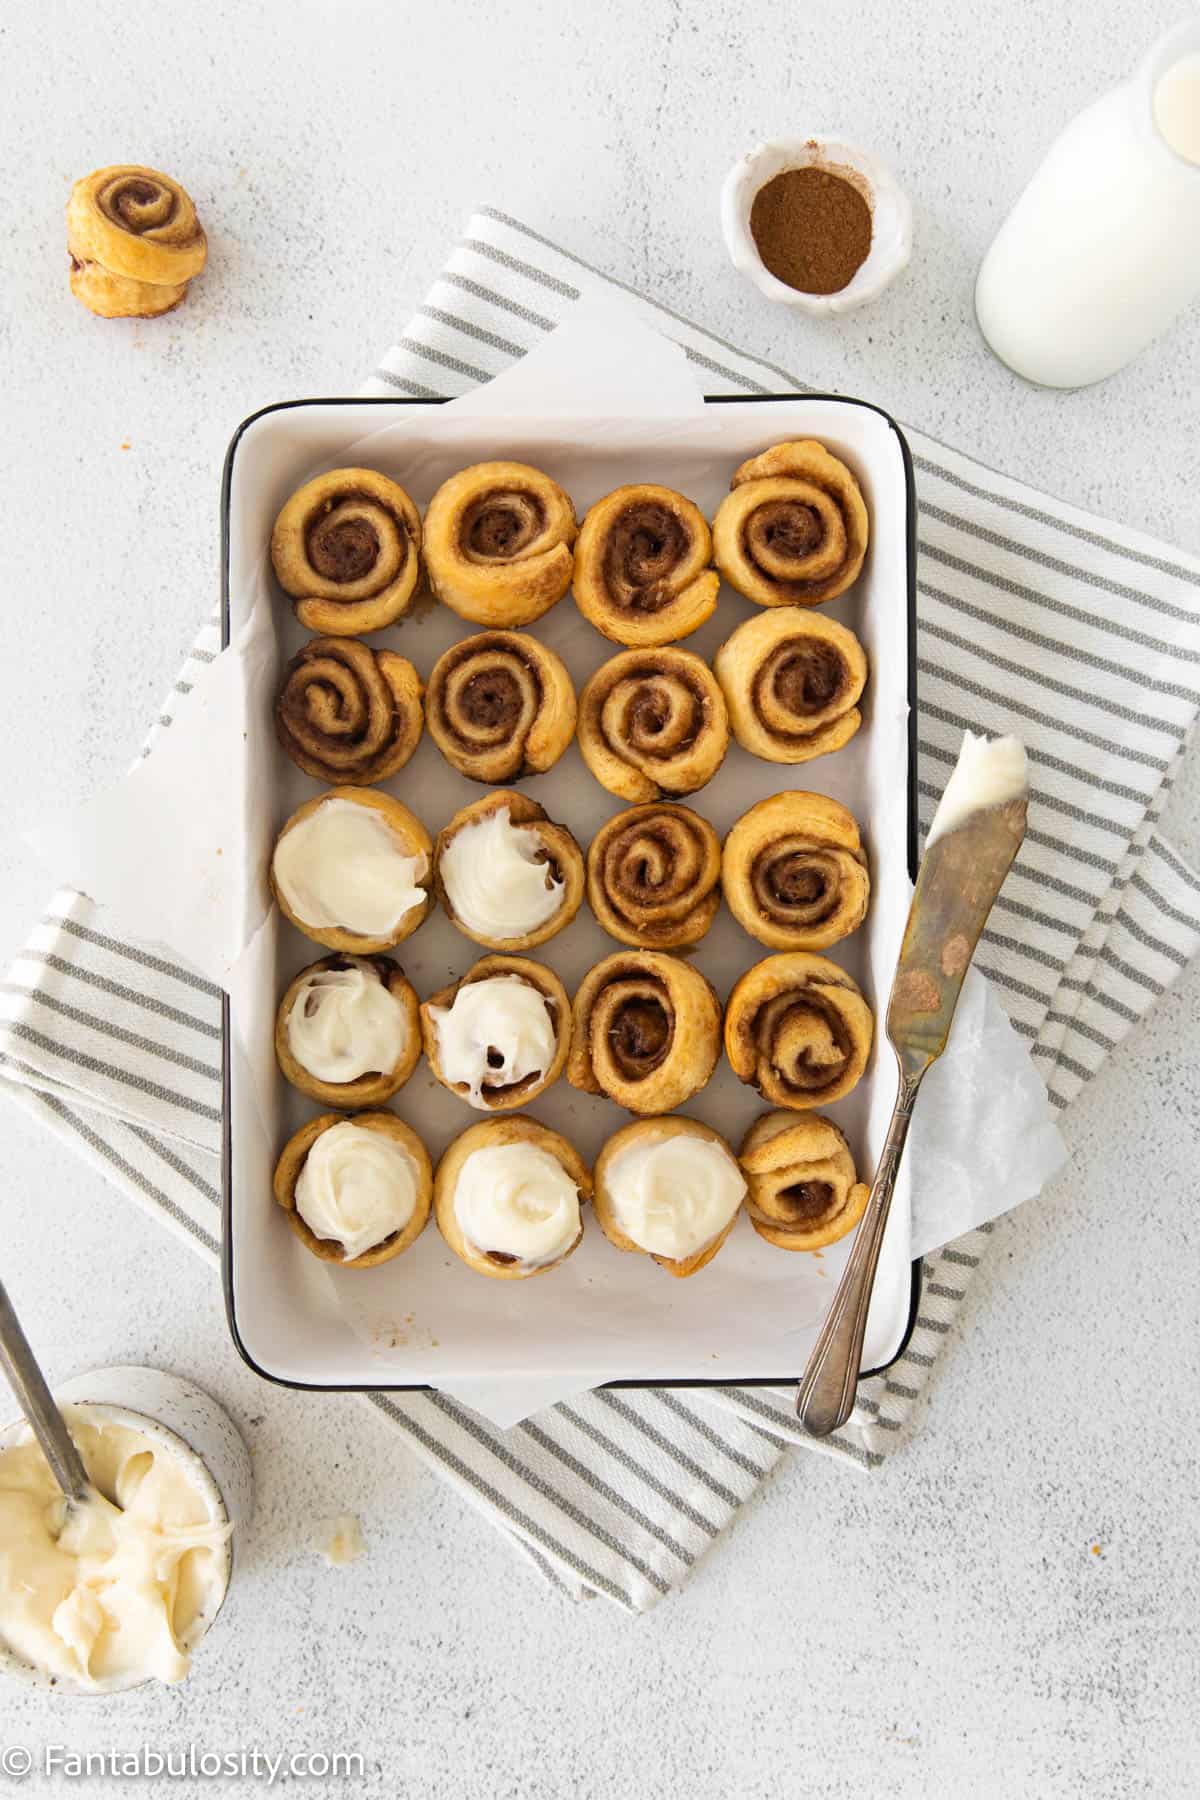 24 baked mini cinnamon rolls in a 9x13 baking dish with frosting on 7 of them.